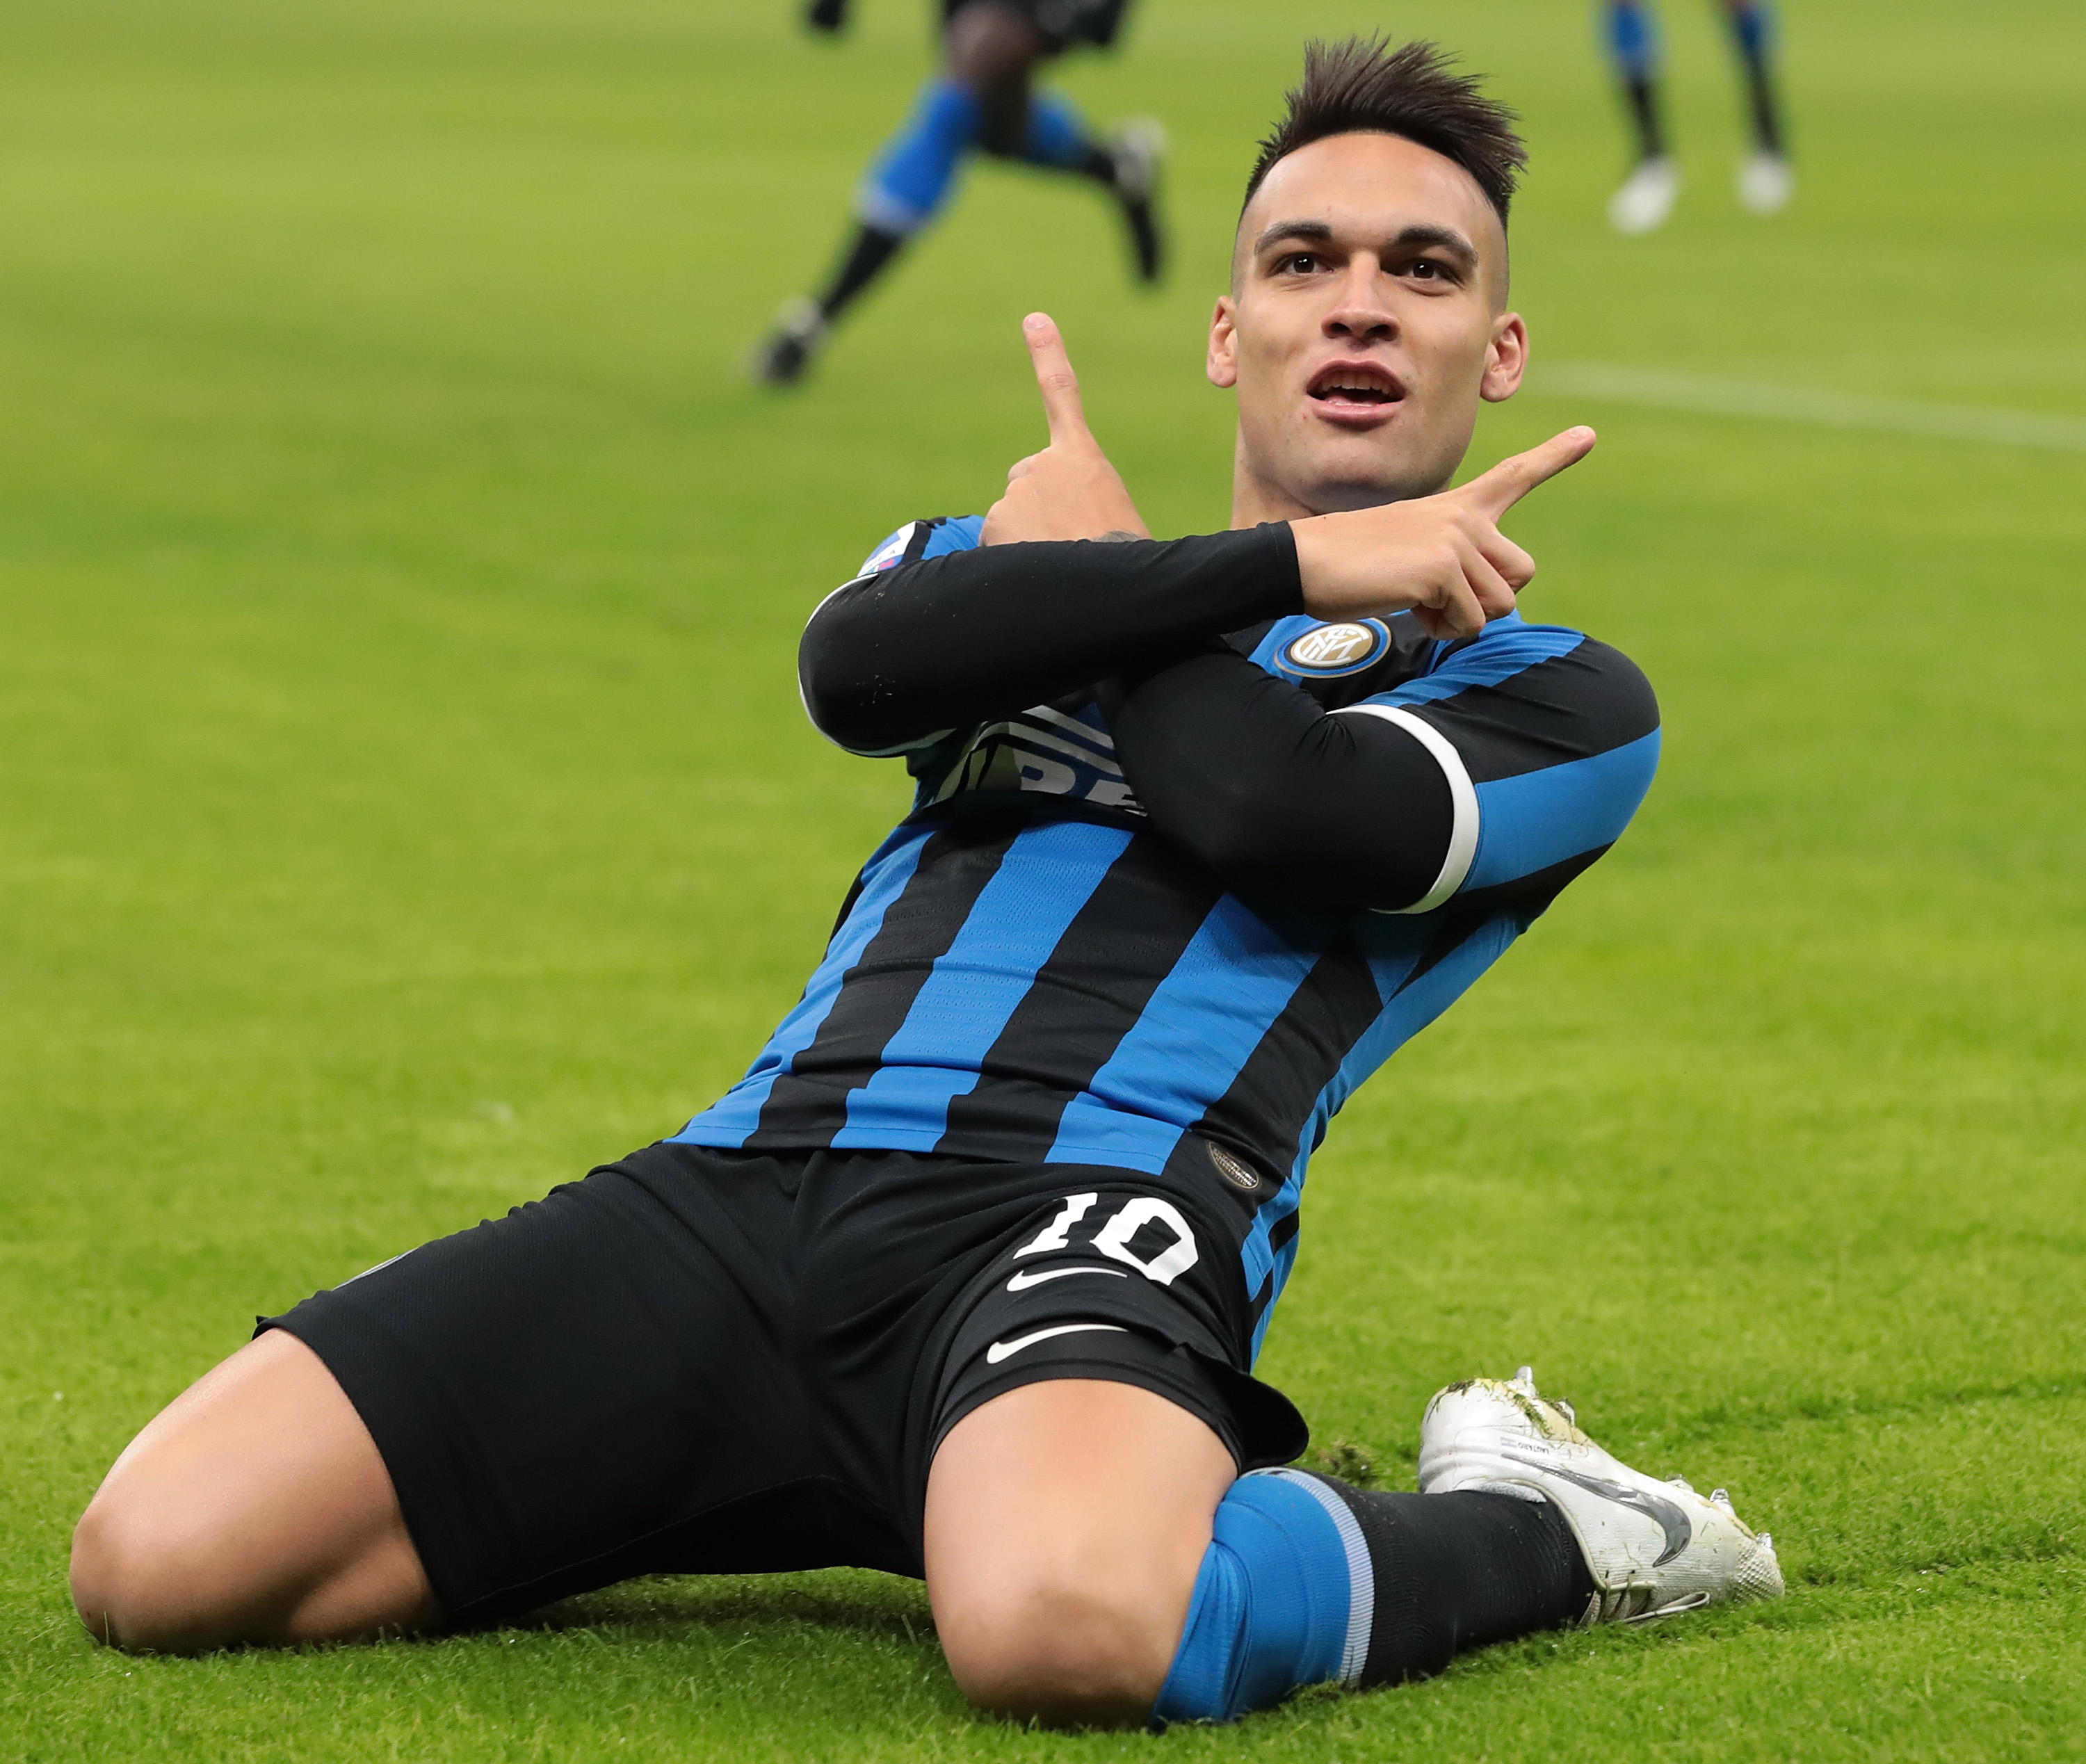 Tottenham Hotspur have agreed on a club-record fee with Inter Milan for Argentine international striker Lautaro Martinez in the ongoing summer transfer window.